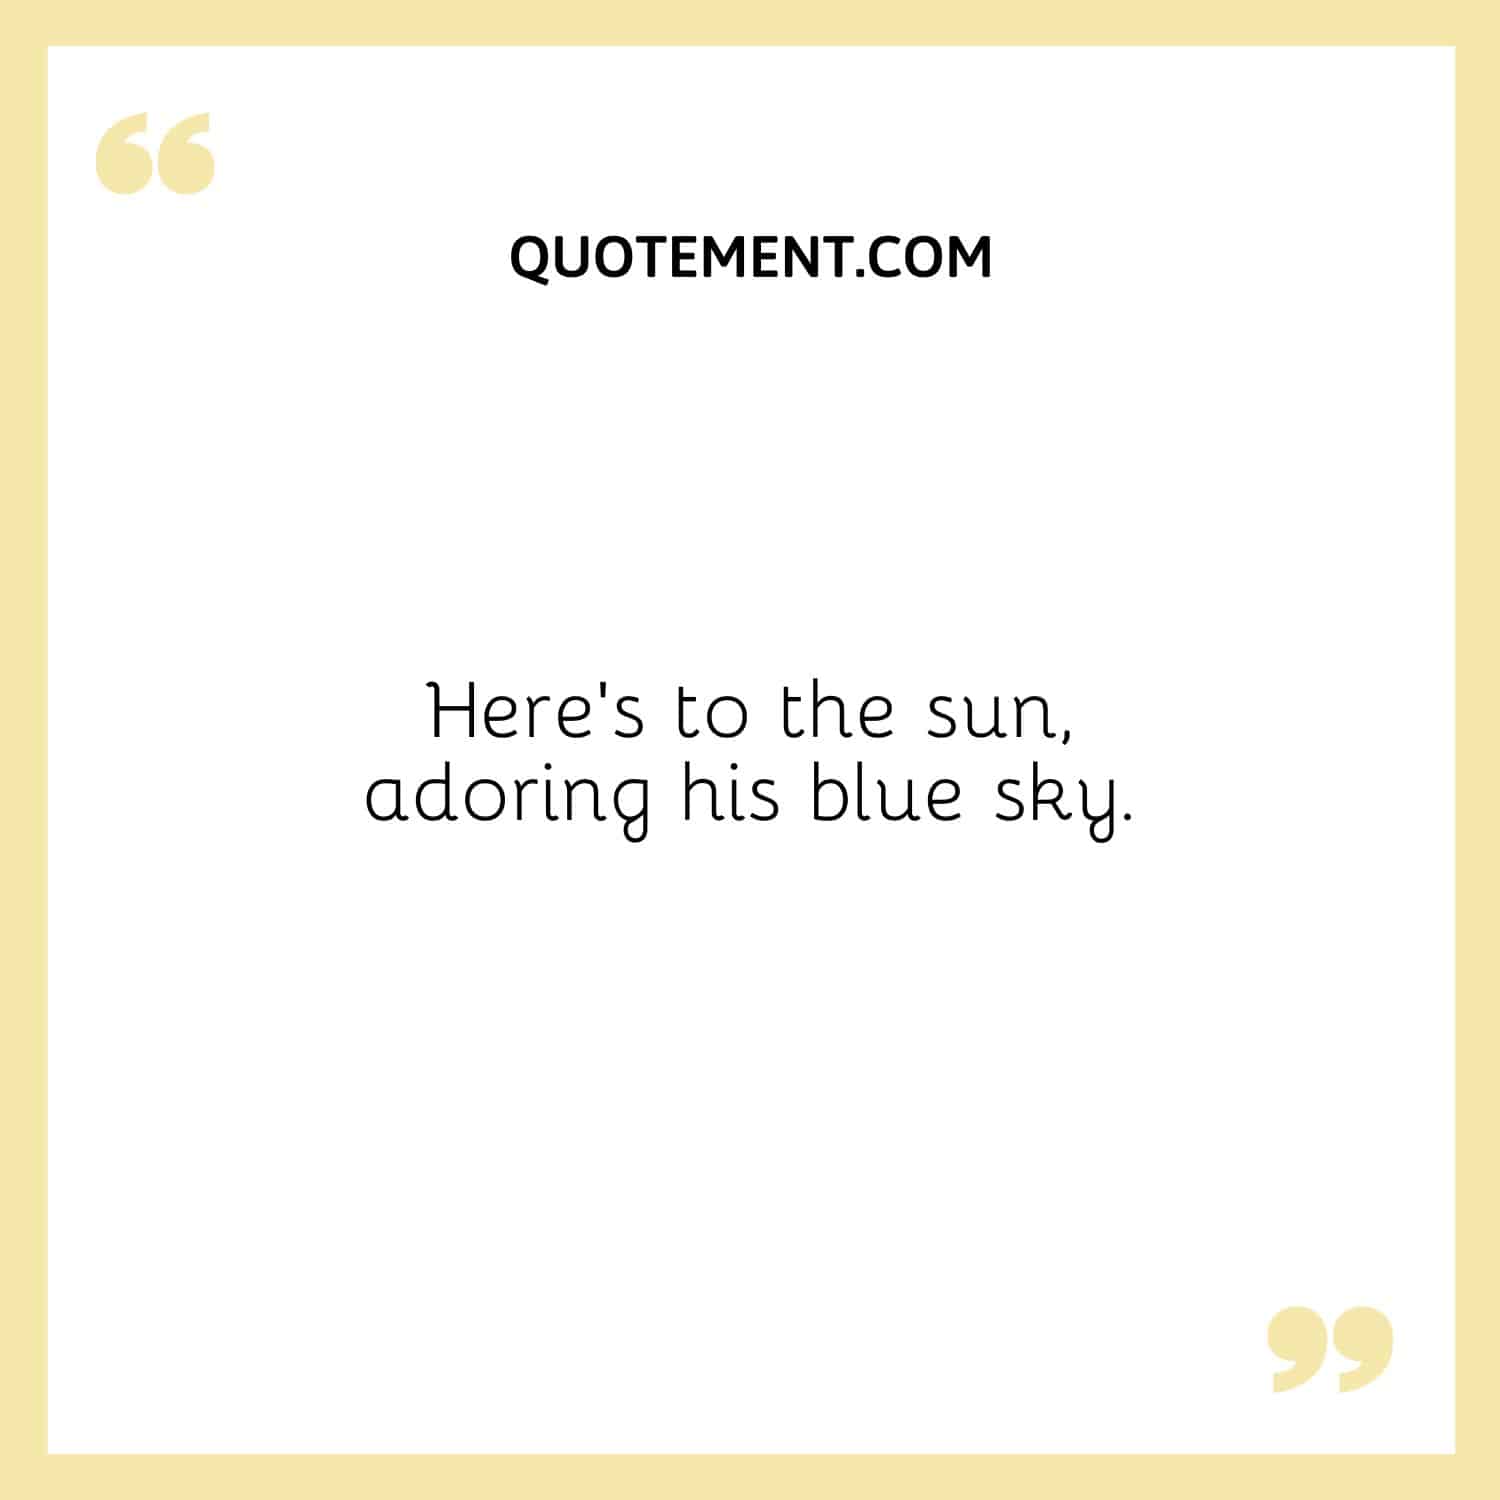 Here’s to the sun, adoring his blue sky.